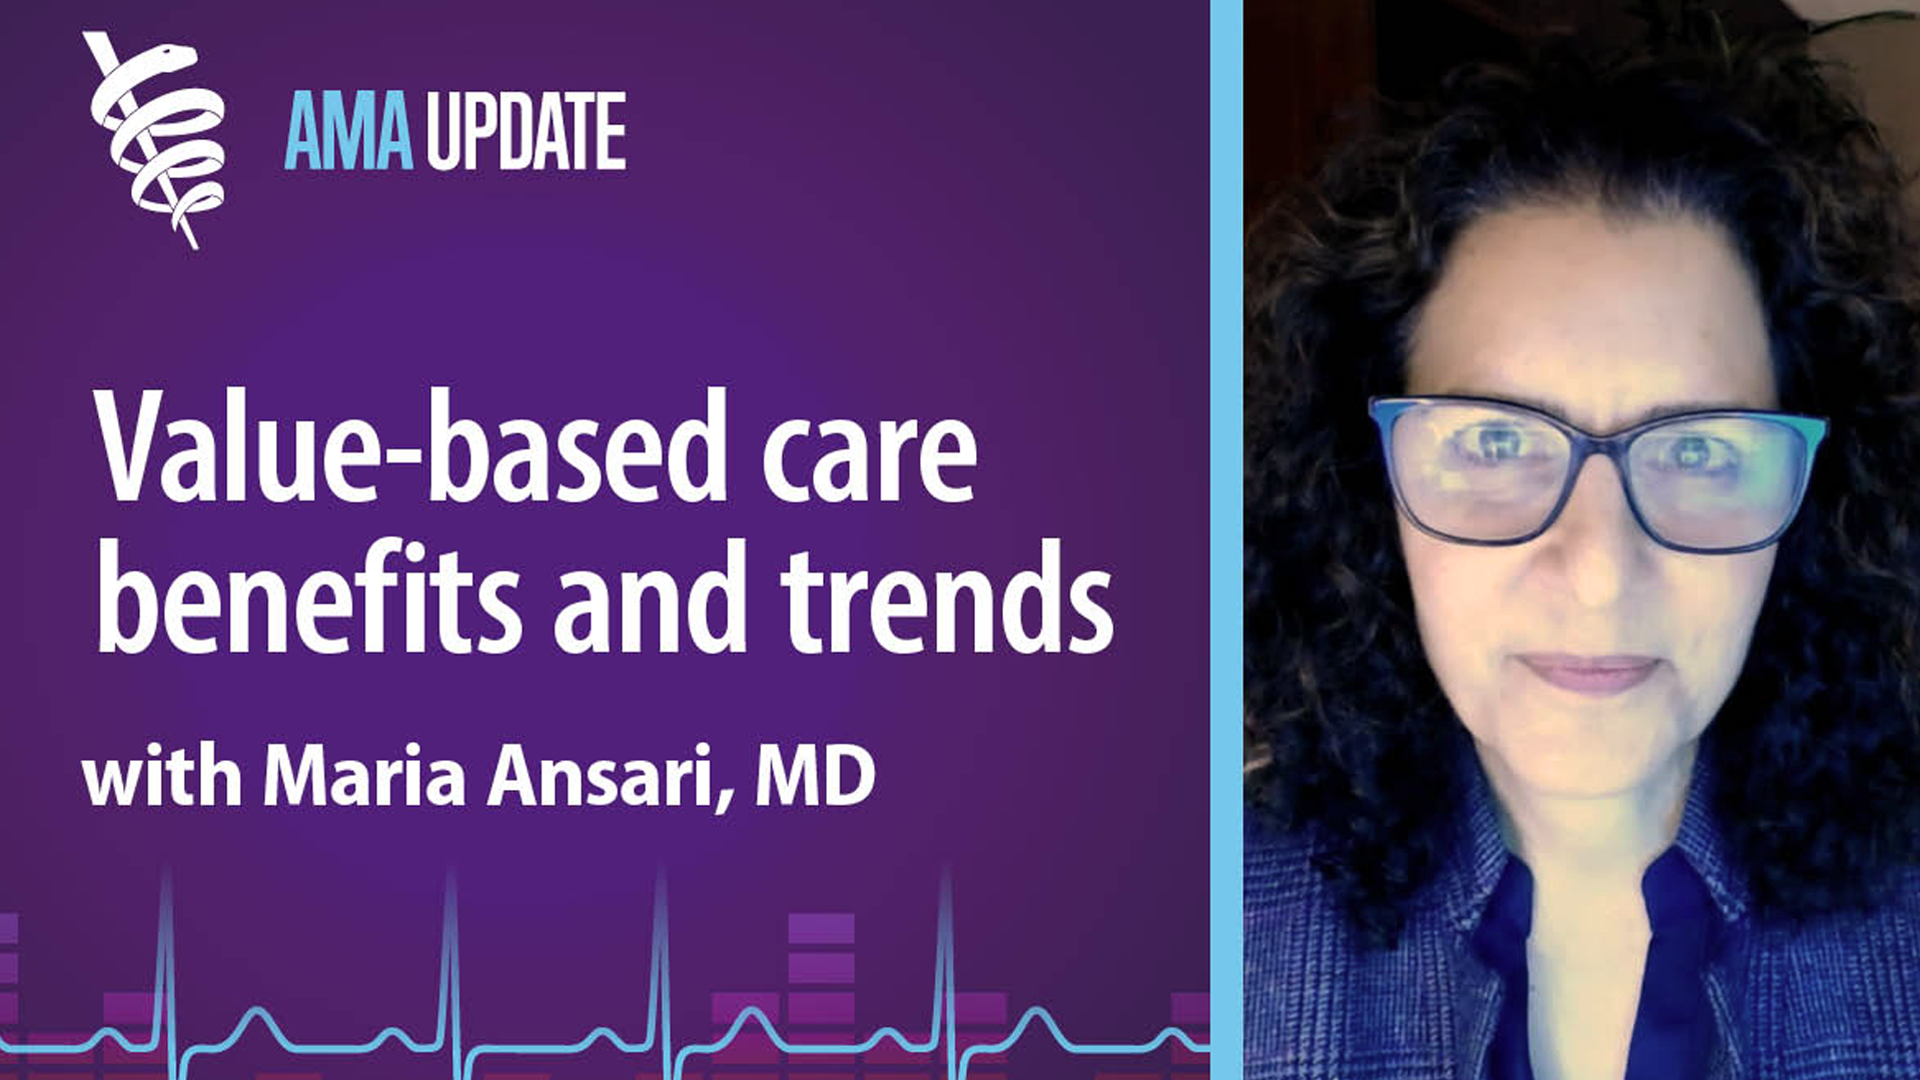 Dr. Maria Ansari: Tipping point for value-based care is now